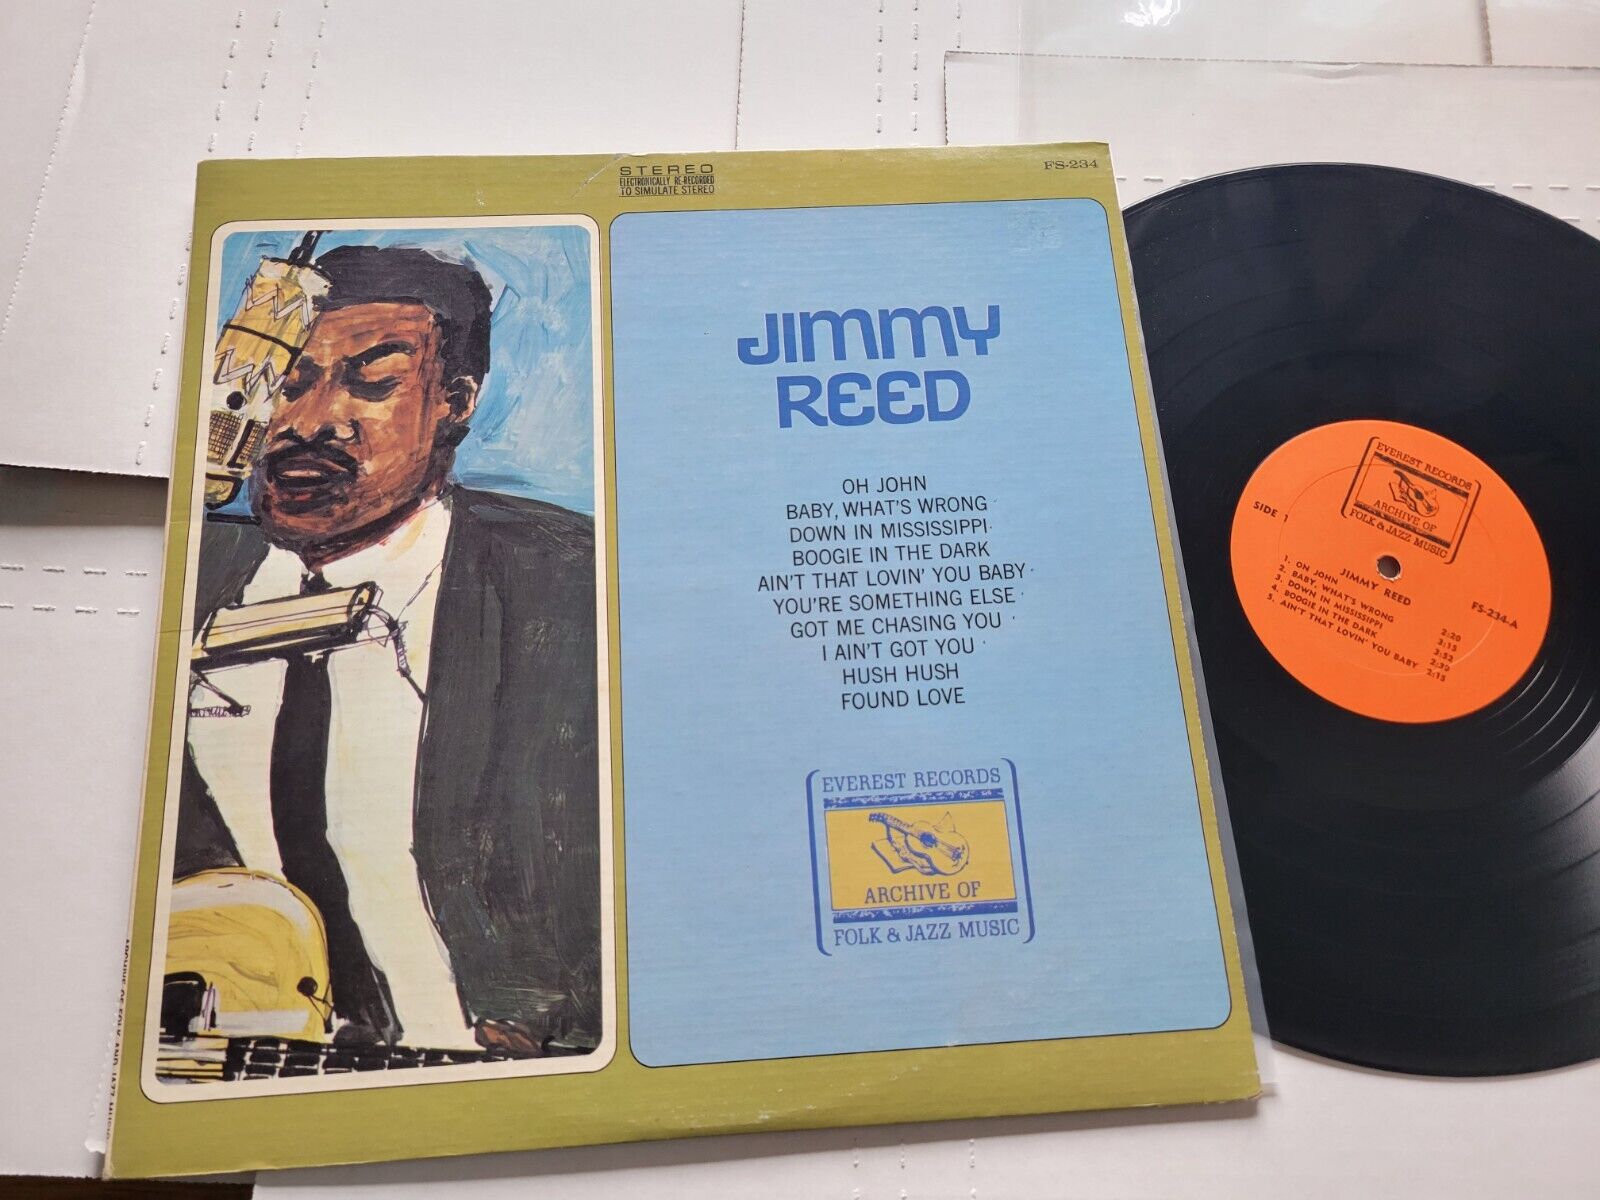 JIMMY REED - Jimmy Reed (LP) 1960's Chicago Electric Blues Folk COMP